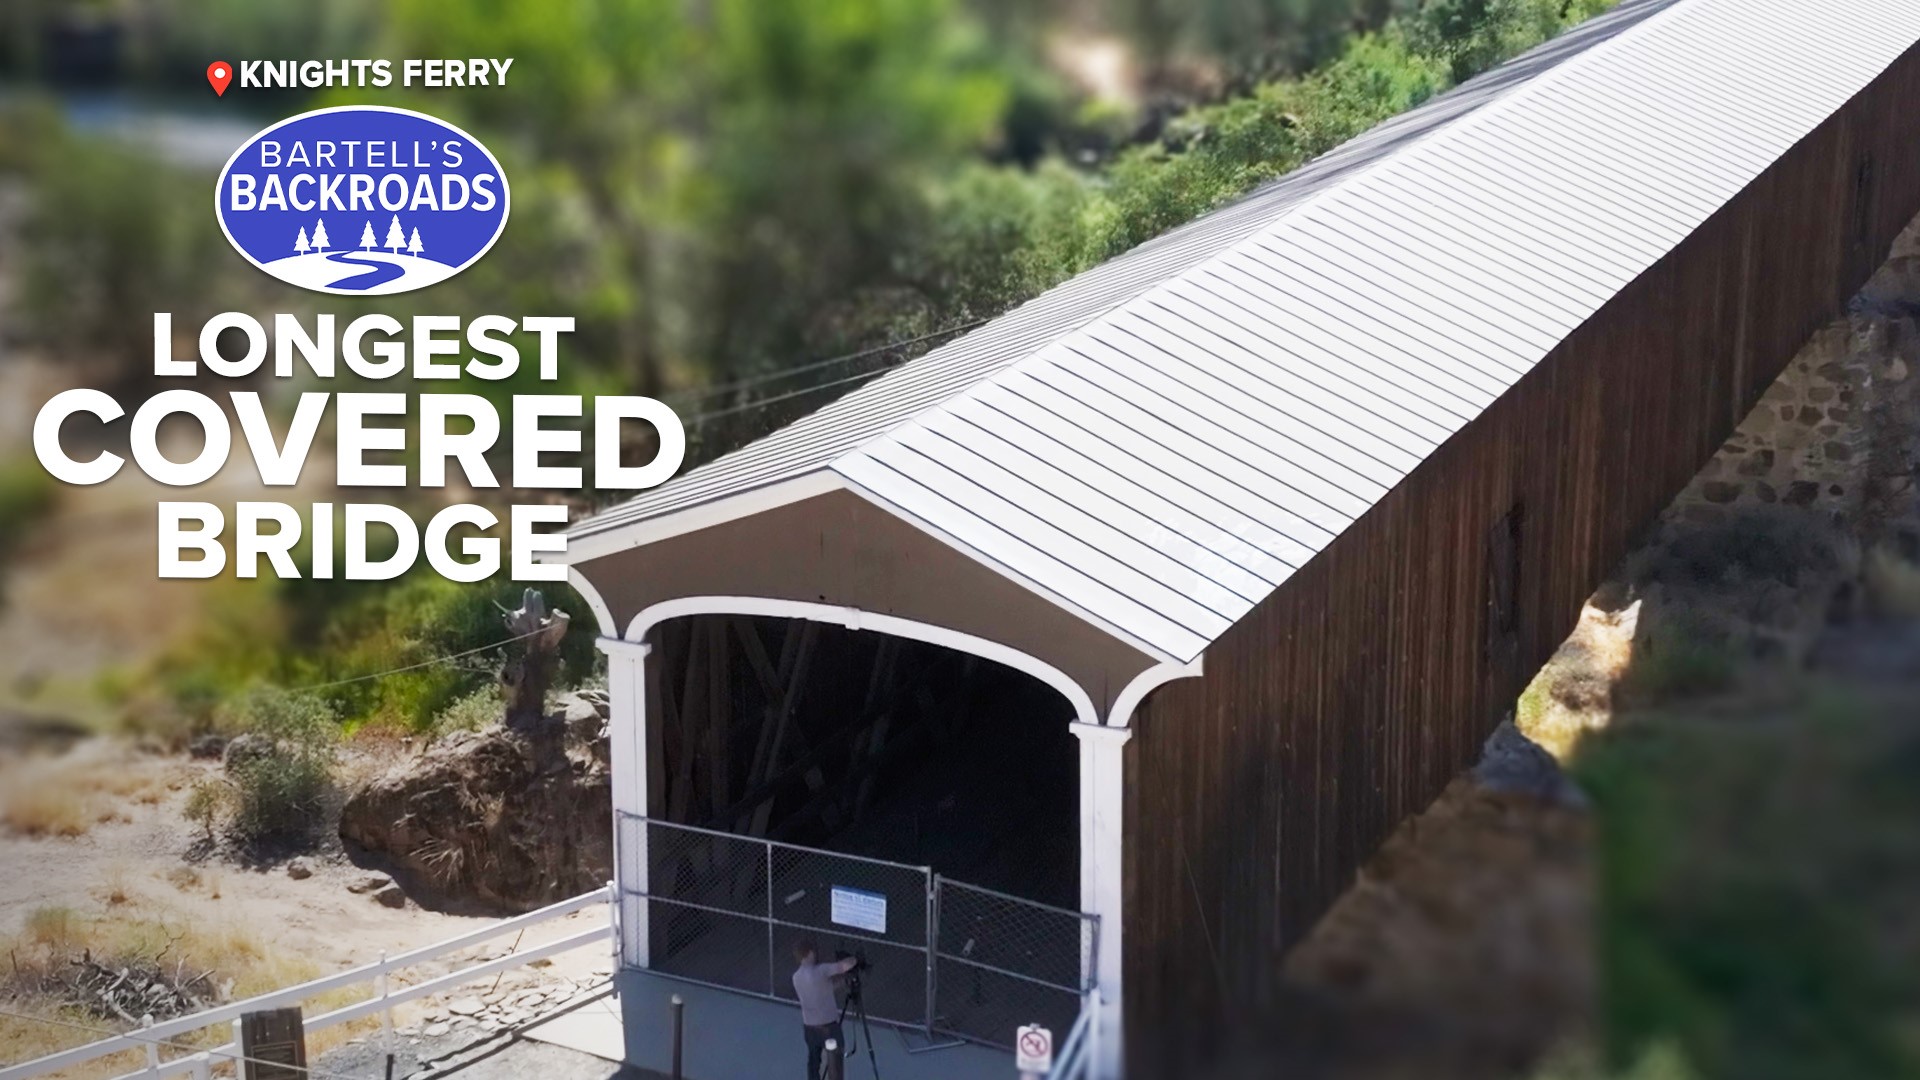 The longest covered bridge in the West has a dangerous past